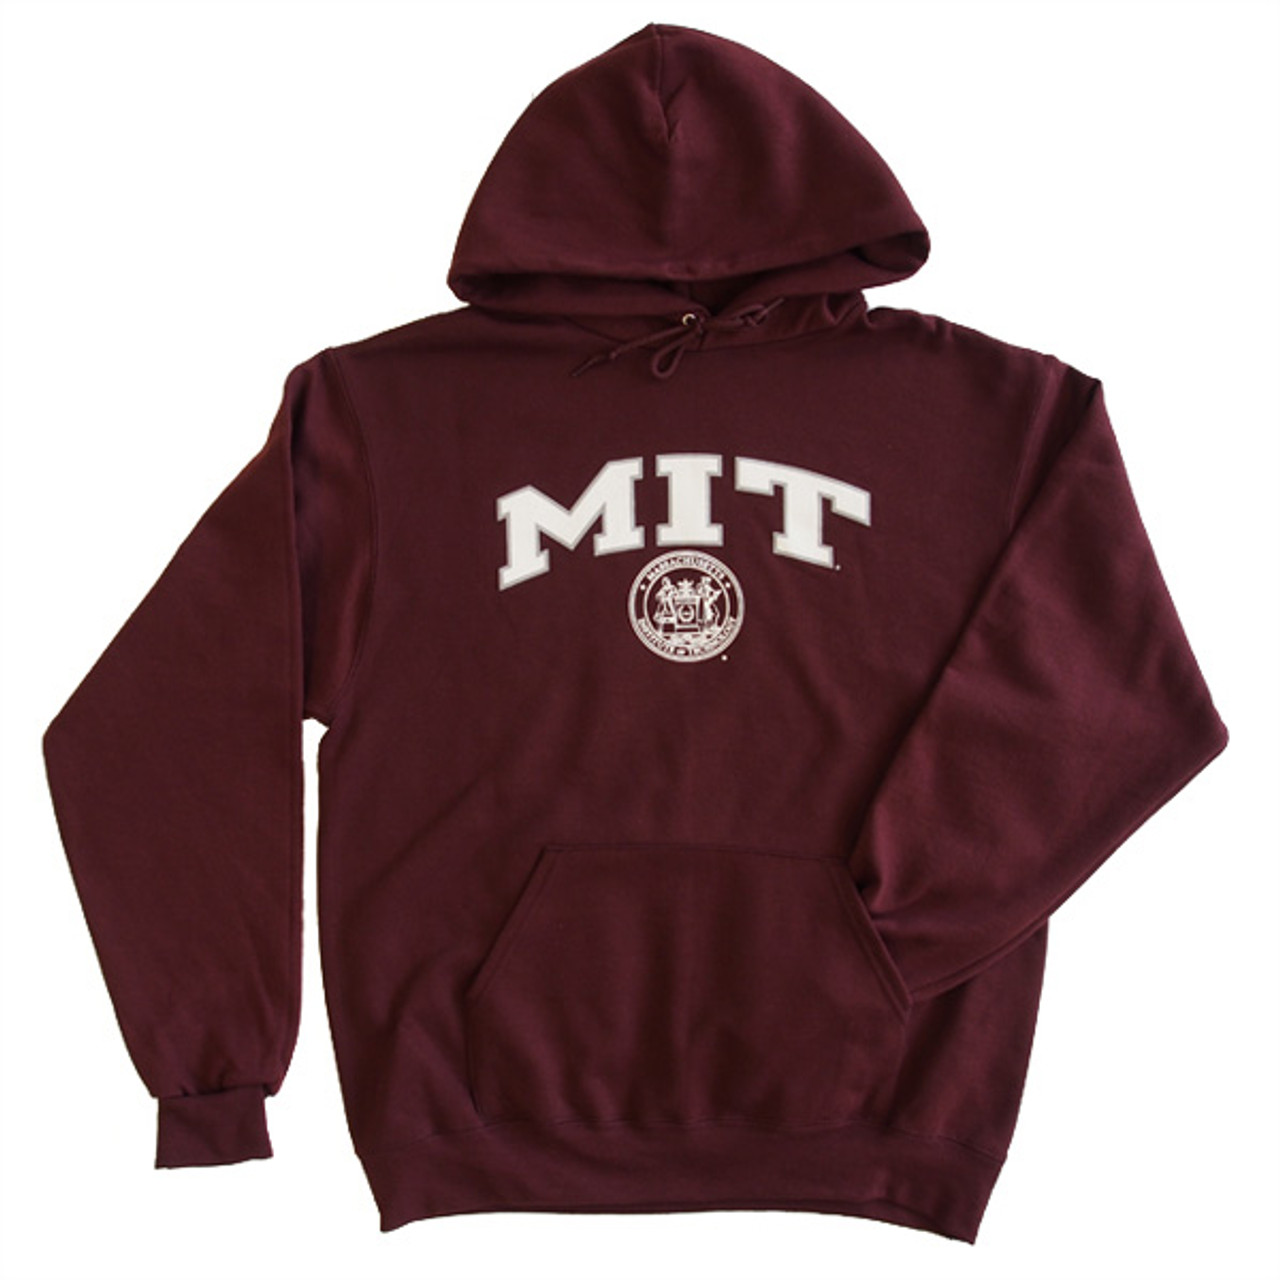 MIT hoodie logo with seal and